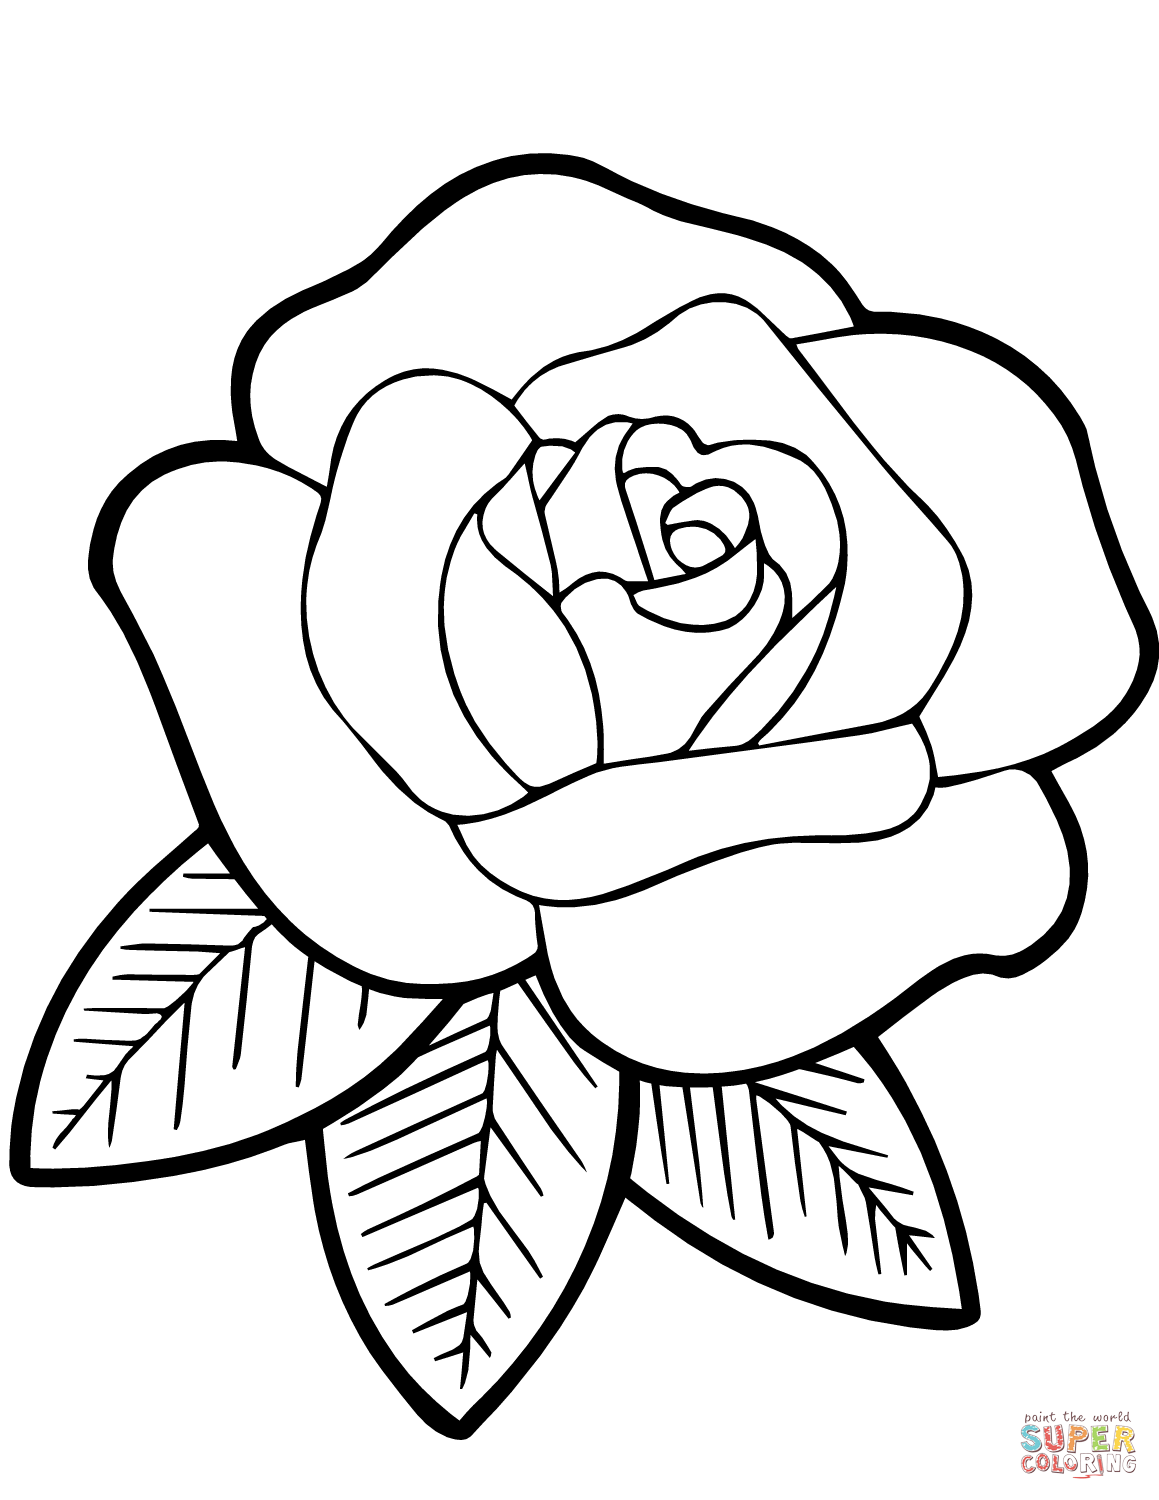 Stained glass rose coloring page free printable coloring pages